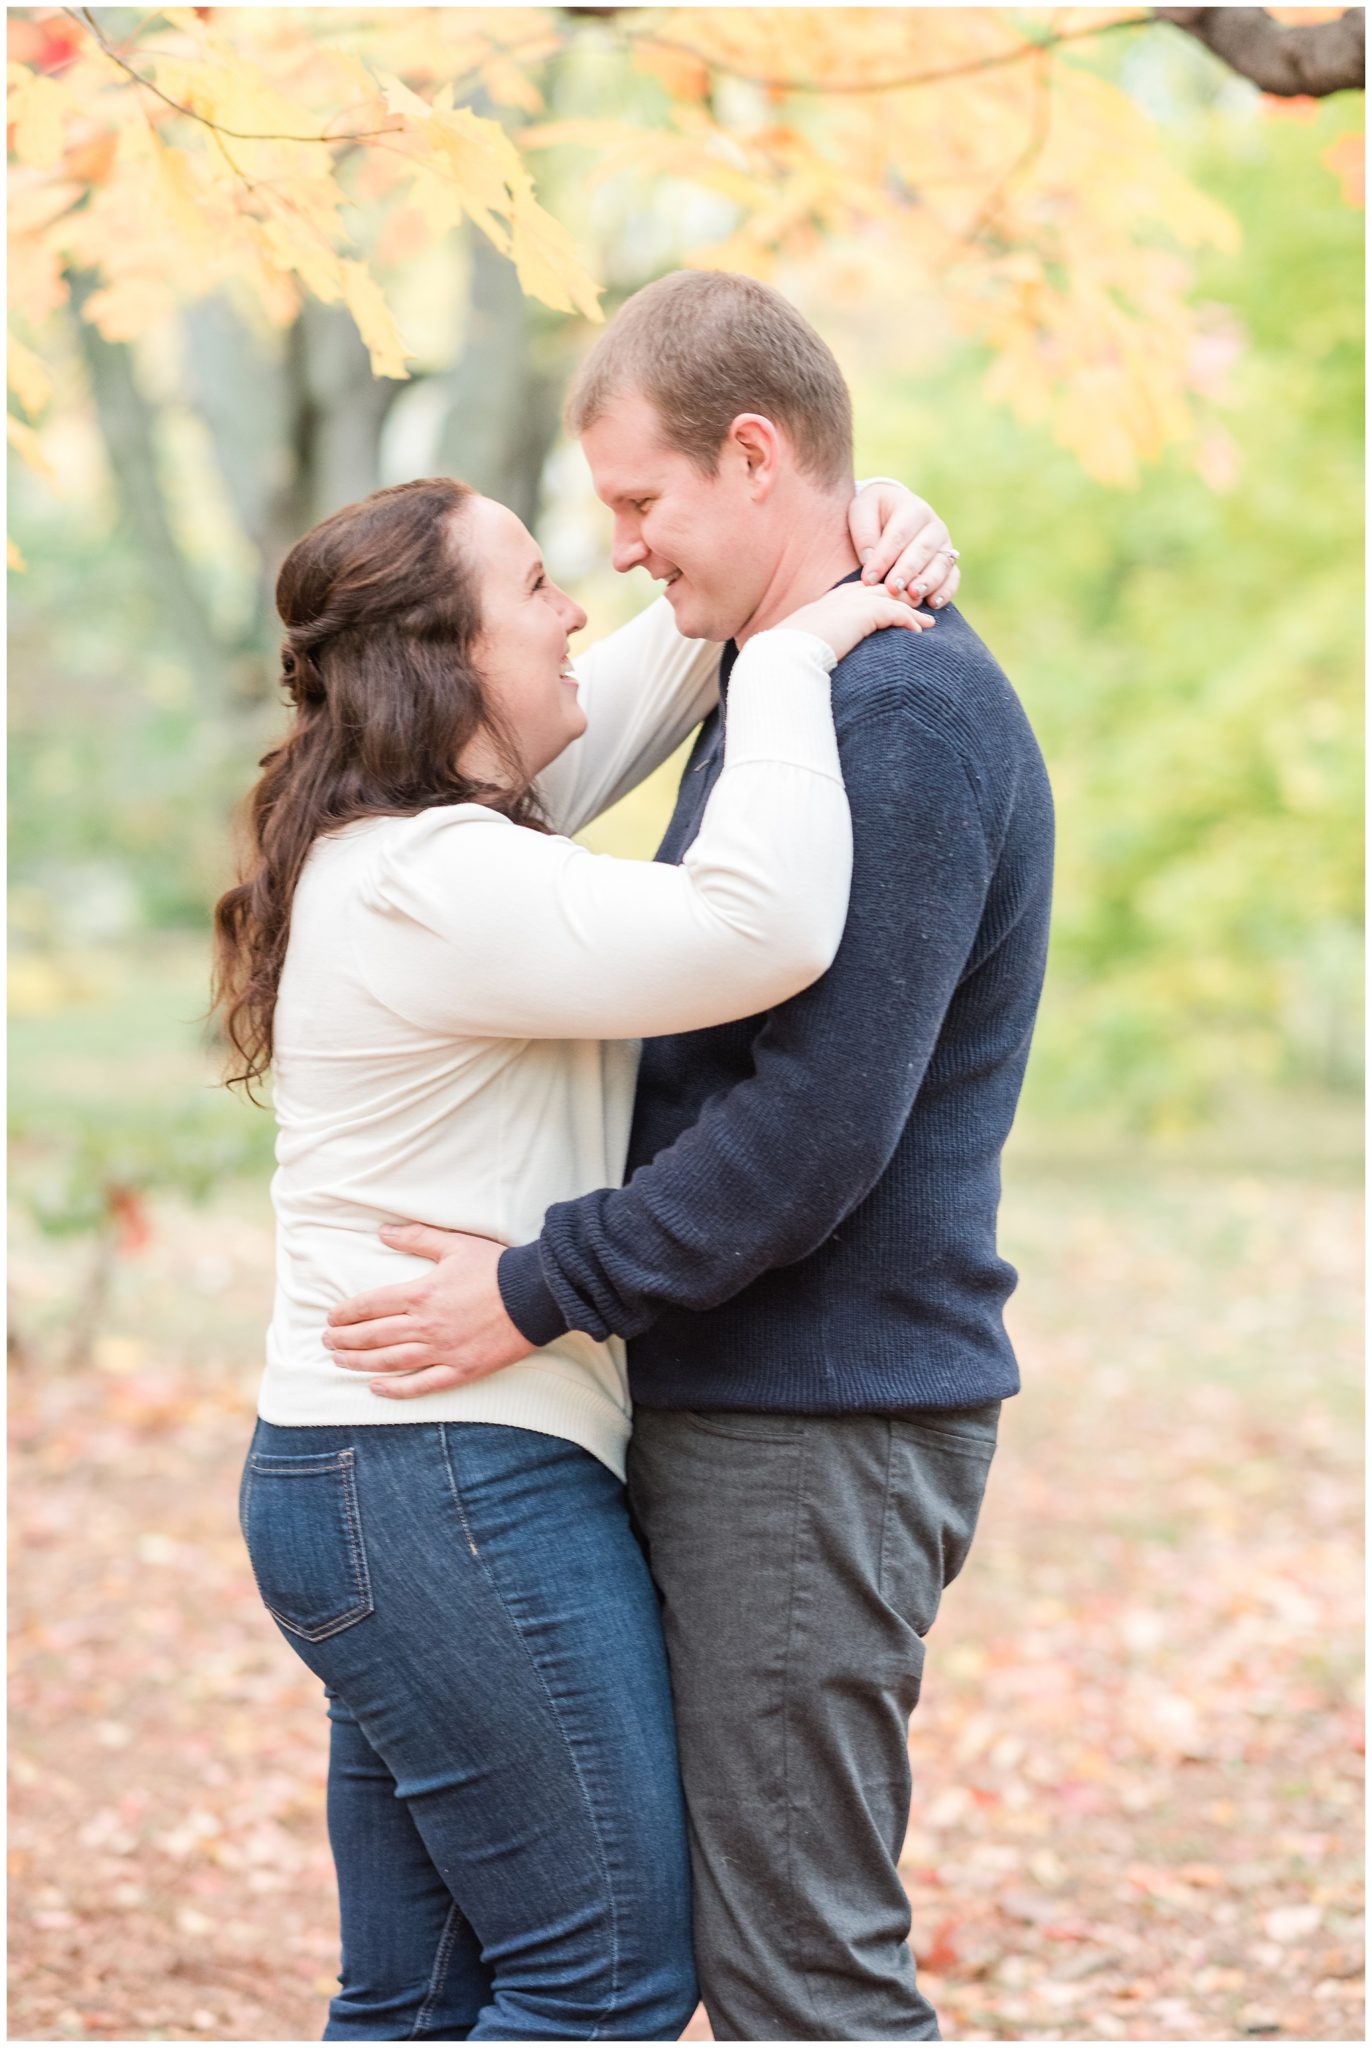 Autumn Arboretum Engagement » Sweet And Giggly Fall Engagement Session ...